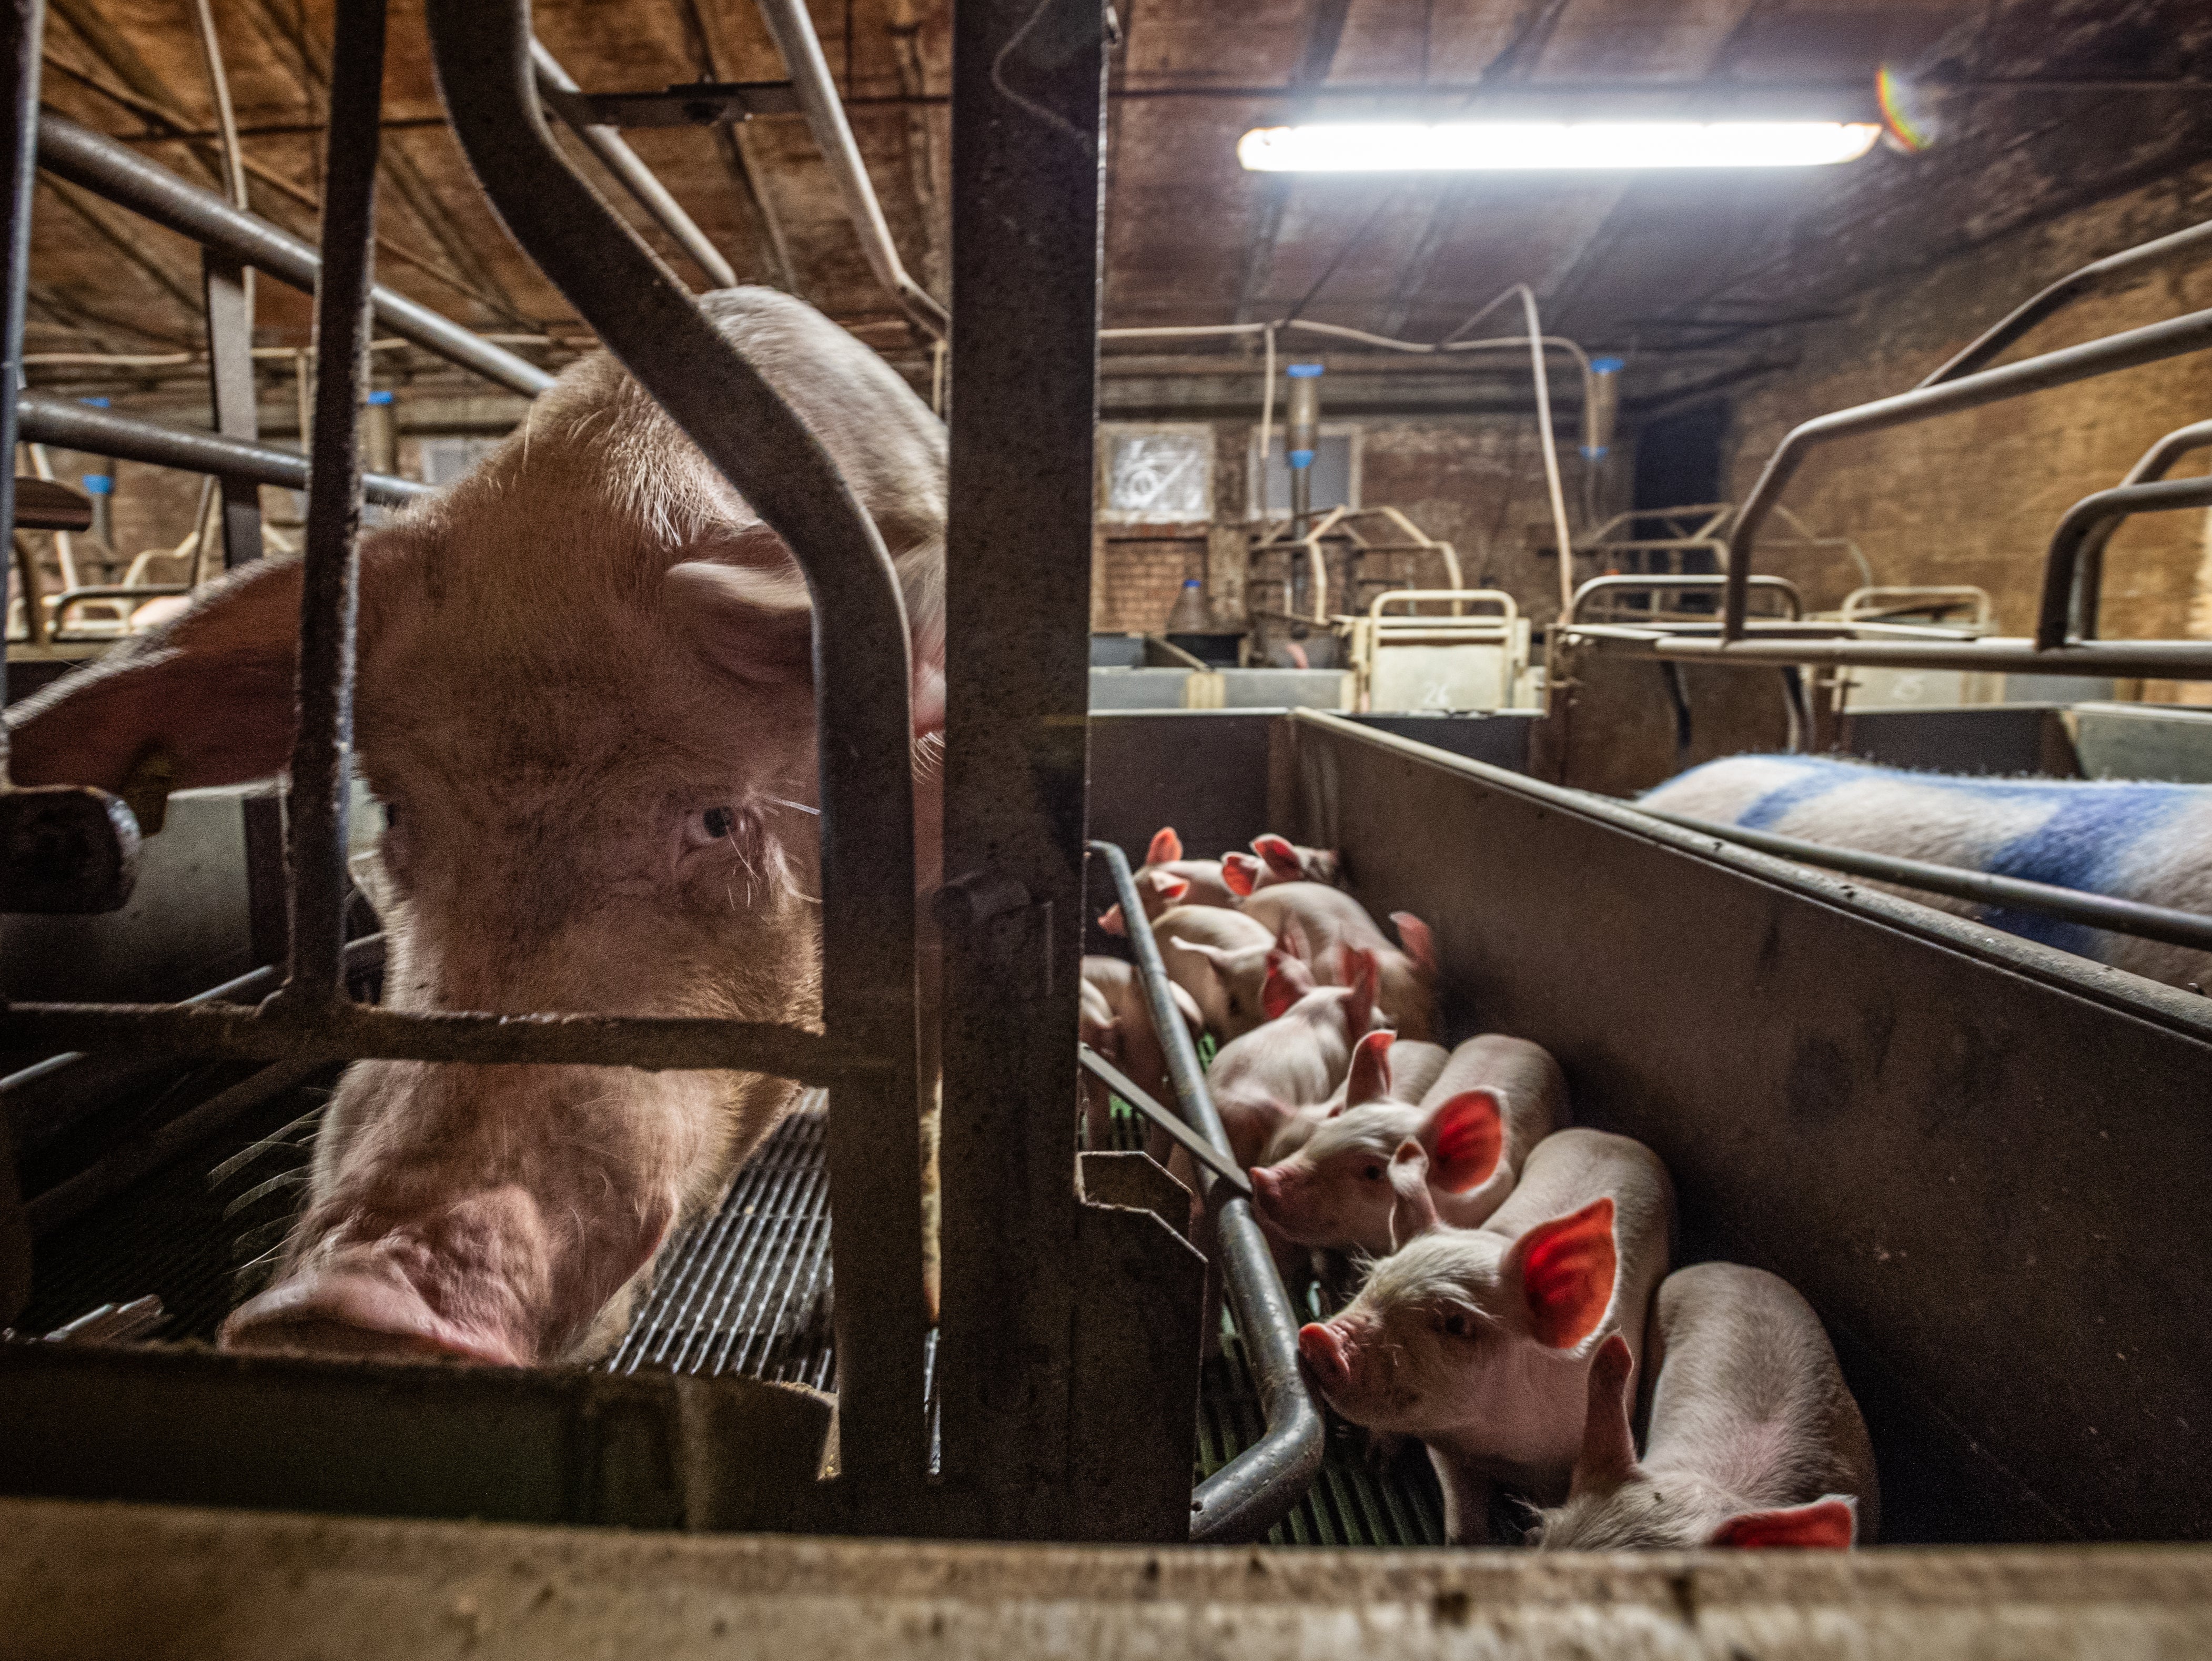 Farrowing crates, which are widely used in pig farming, prevent mother pigs from turning round